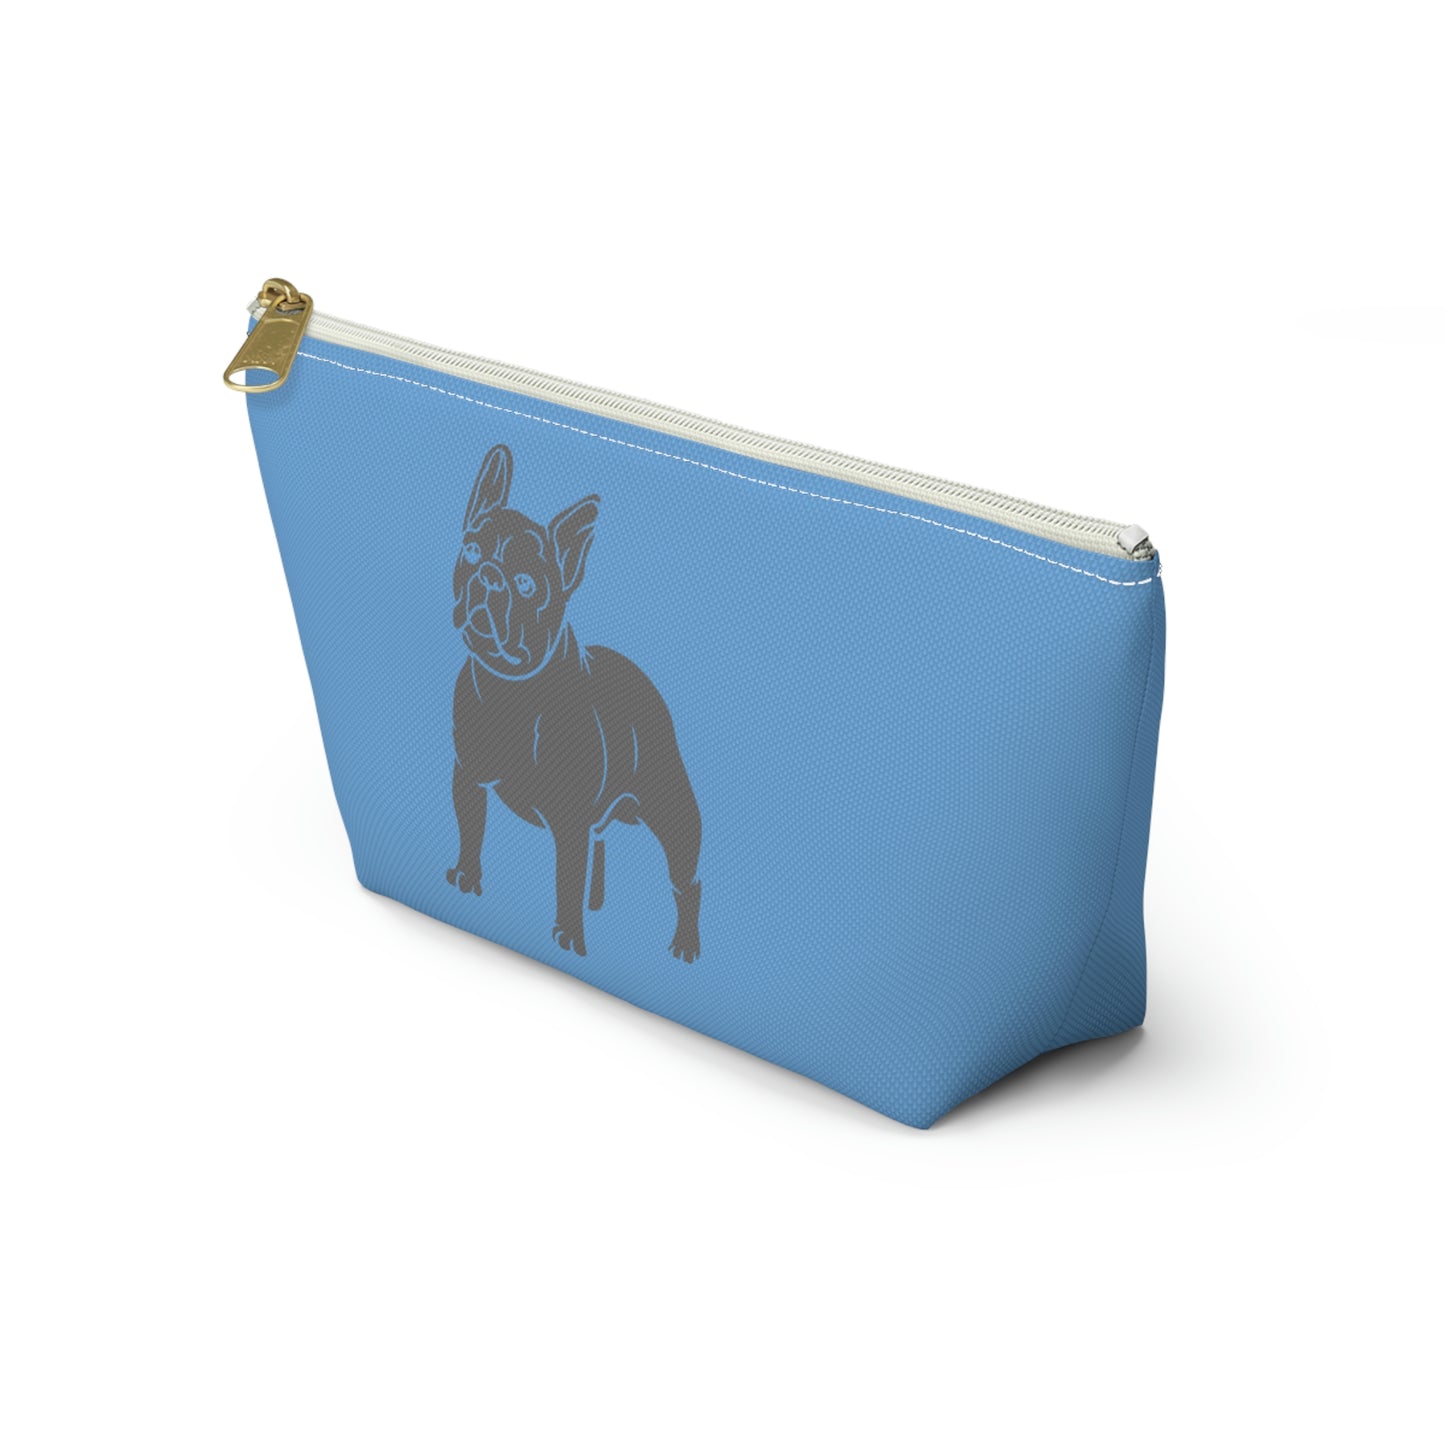 Frenchie Blue Black Accessory Pouch With T-bottom | BKLA | shoes & accessories | backpack, hat, phone cover, tote bags, clutch bags